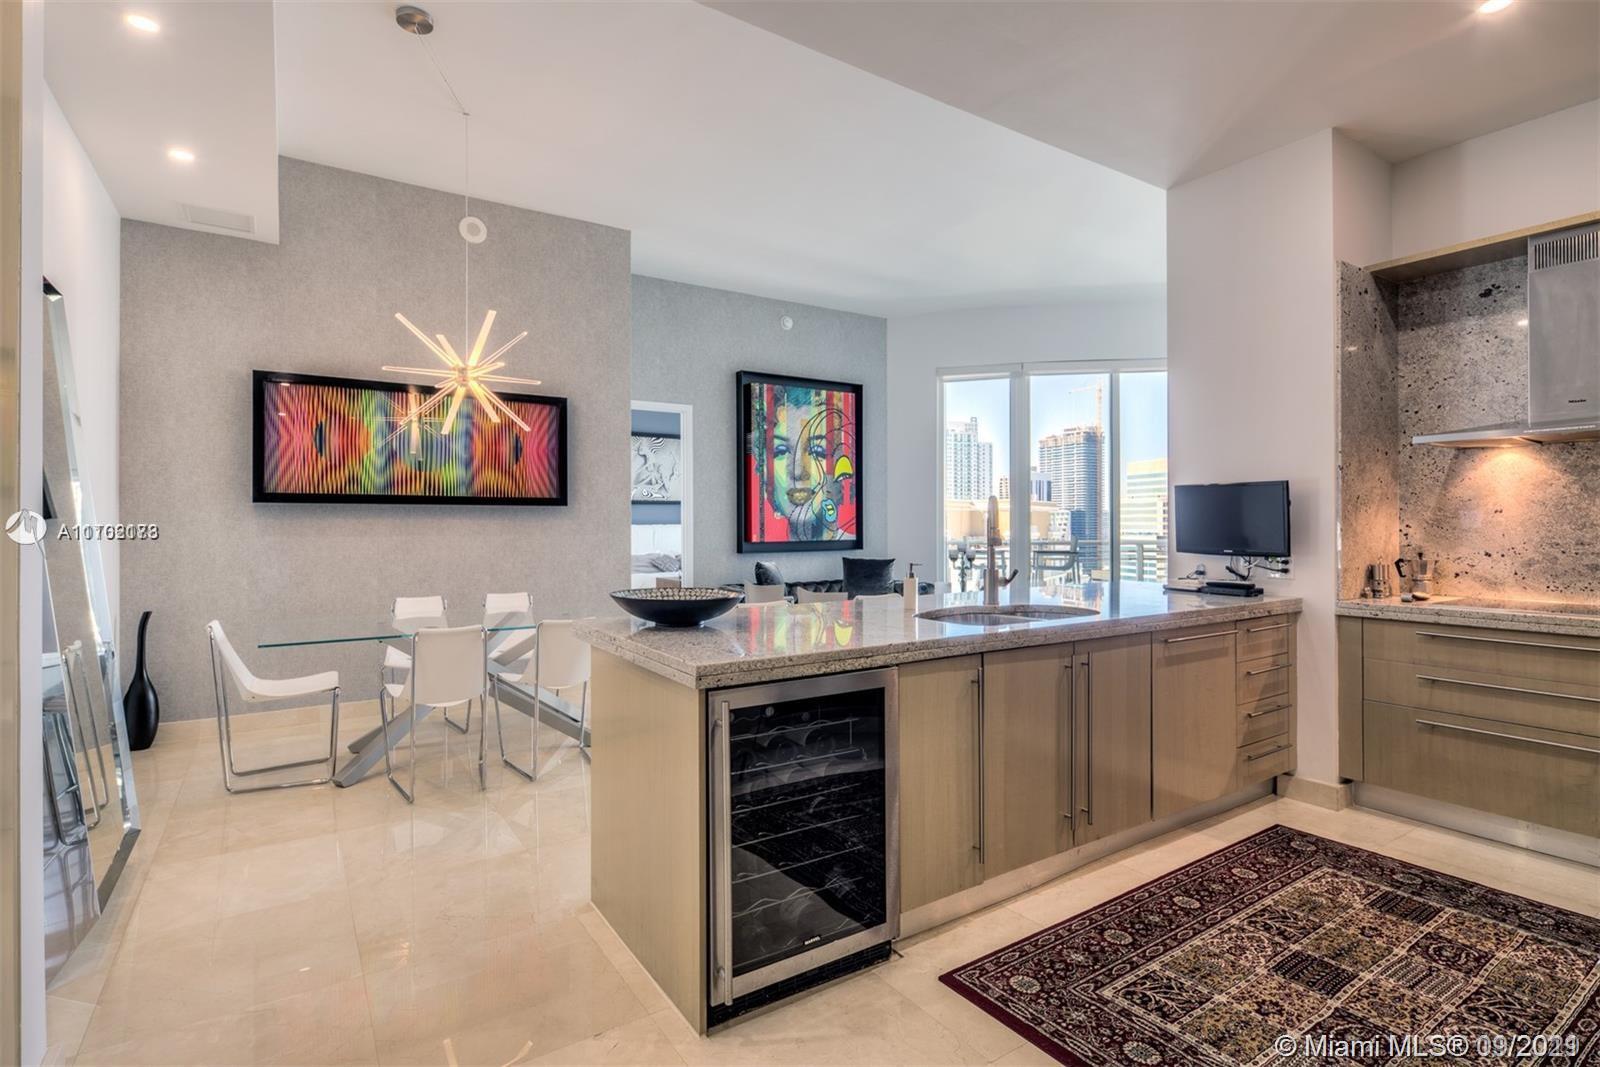 BEAUTIFUL UNIT.  ASIA CONDO 2 BEDROOMS AND 2.5 BATHROOMS WITH MARBLE FLOORS, HIGH CEILINGS, PRIVATE ELEVATOR, ELEGANT KITCHEN WITH BEAUTIFUL VIEWS. AMENITIES INCLUDE TENNIS COURT, POOL, GYM, STORAGE, PARTY ROOM, RACQUETBALL COURT, JACUZZI, SAUNA AND 24 HOURS VALET.